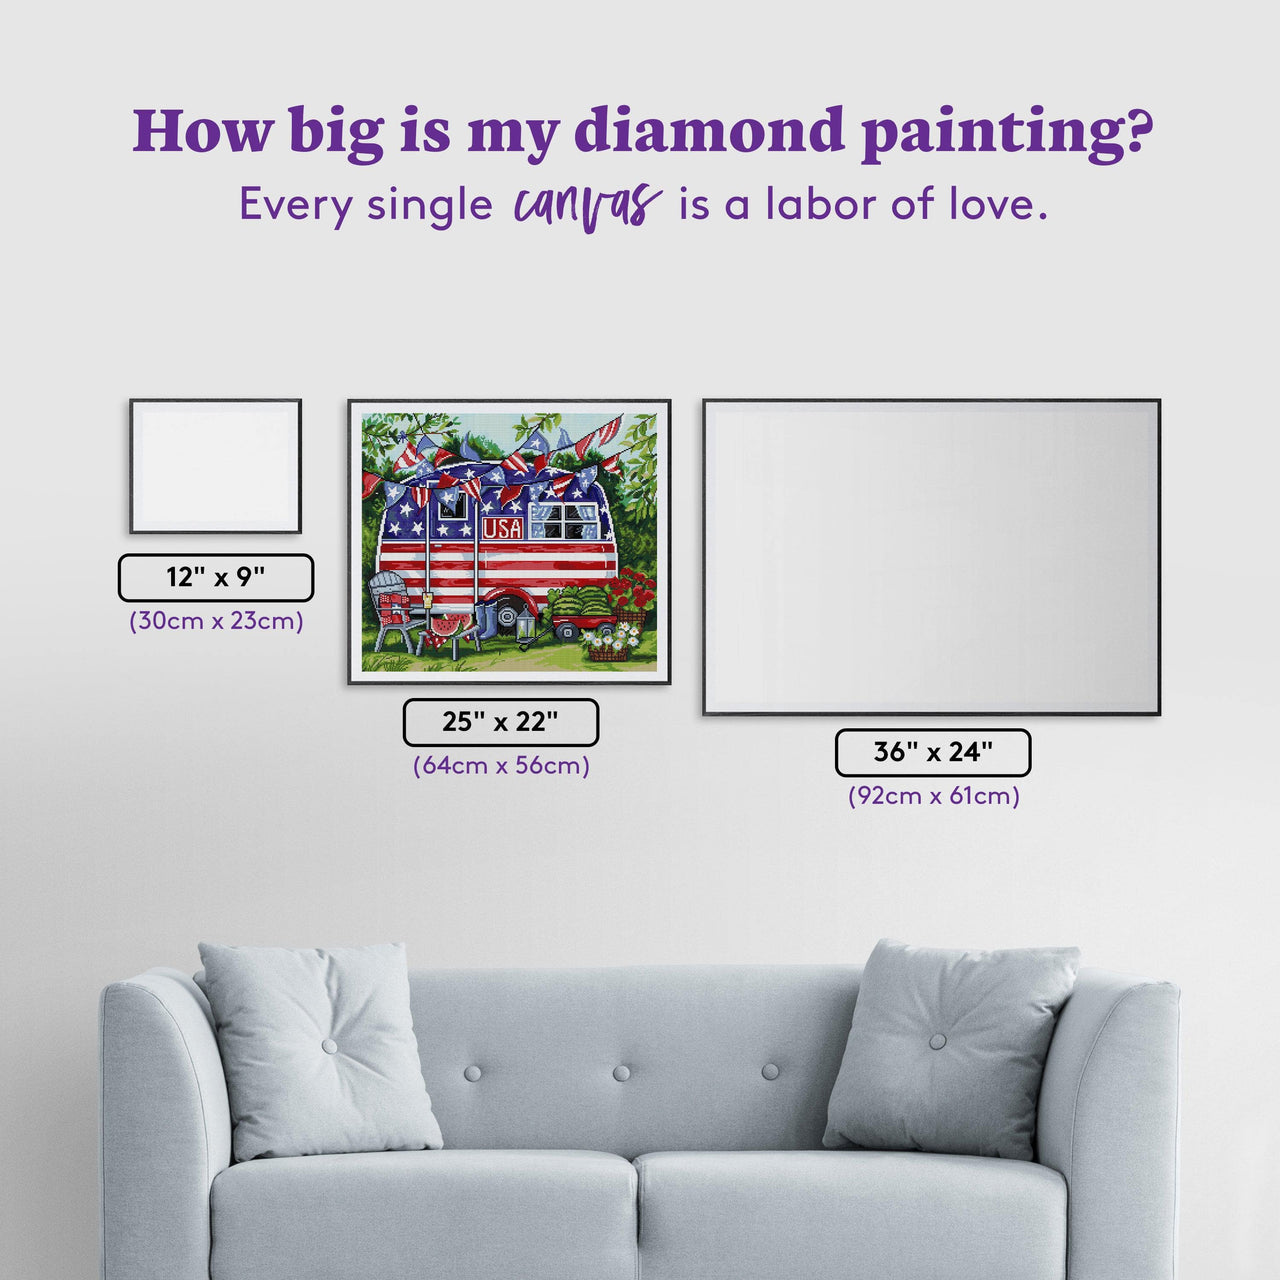 Diamond Painting Patriotic Camper 25" x 22" (64cm x 56cm) / Square with 43 Colors including 4 ABs / 57,344